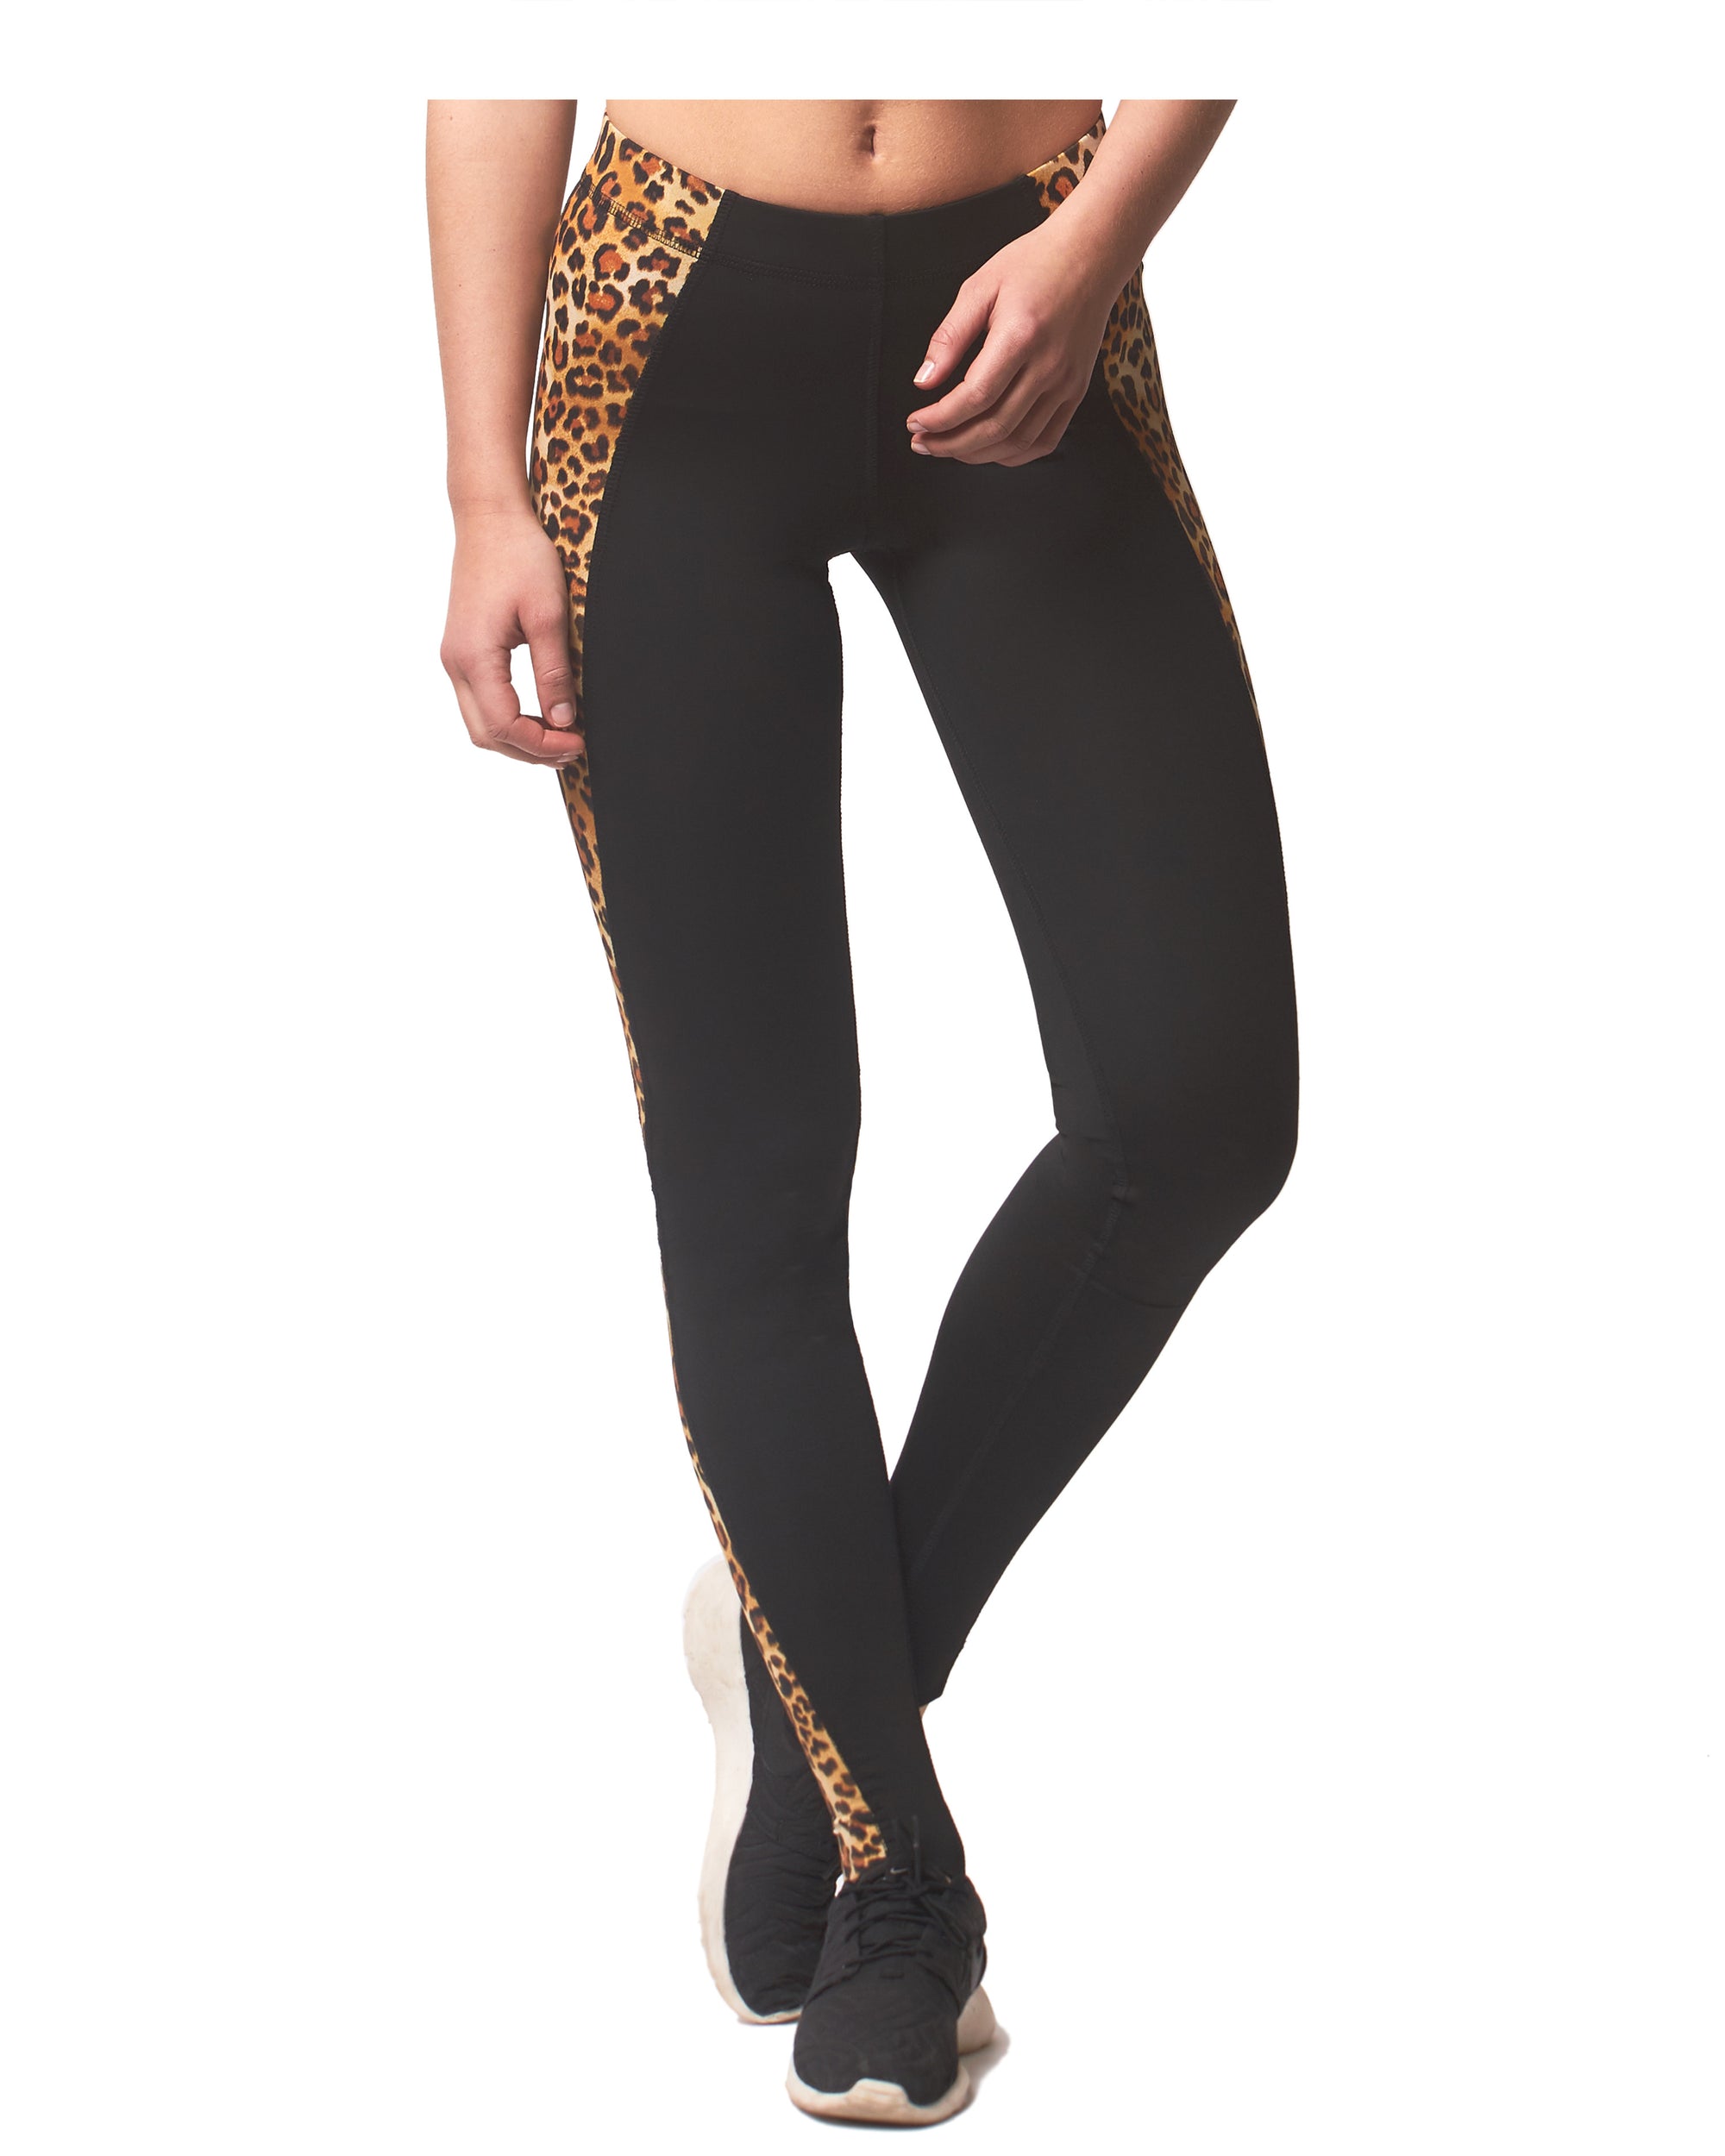 Workout leggings - Black and leopard print - Shaping performance tights for  yoga, running, cycling and the gym - Fashionable and stylish - By LPRD